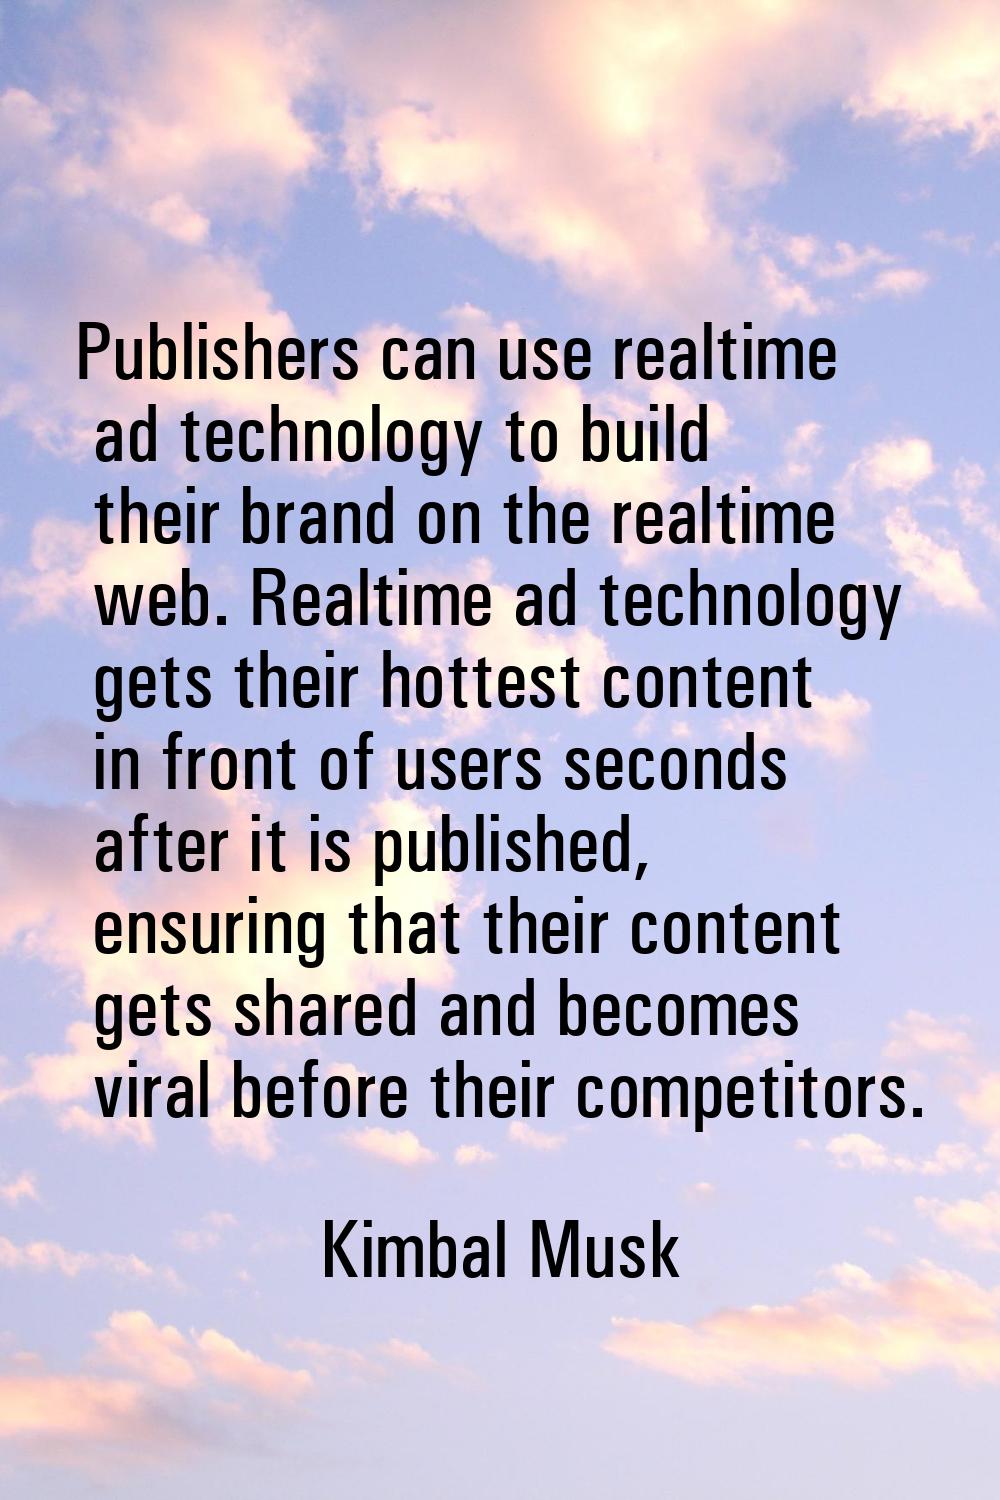 Publishers can use realtime ad technology to build their brand on the realtime web. Realtime ad tec